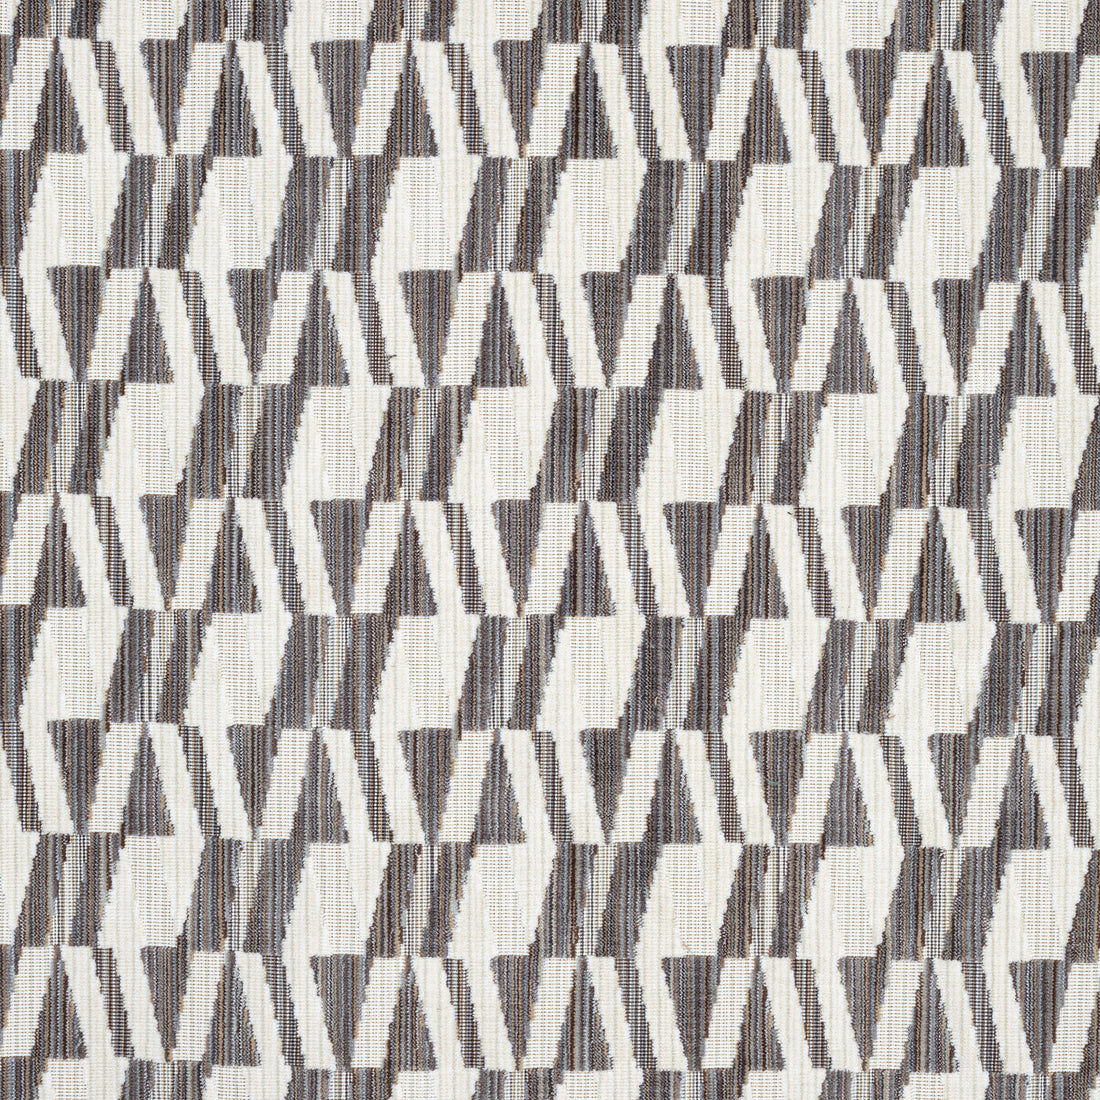 Bossa Nova Velvet fabric in charcoal color - pattern number W72812 - by Thibaut in the Woven Resource 13: Fusion Velvets collection